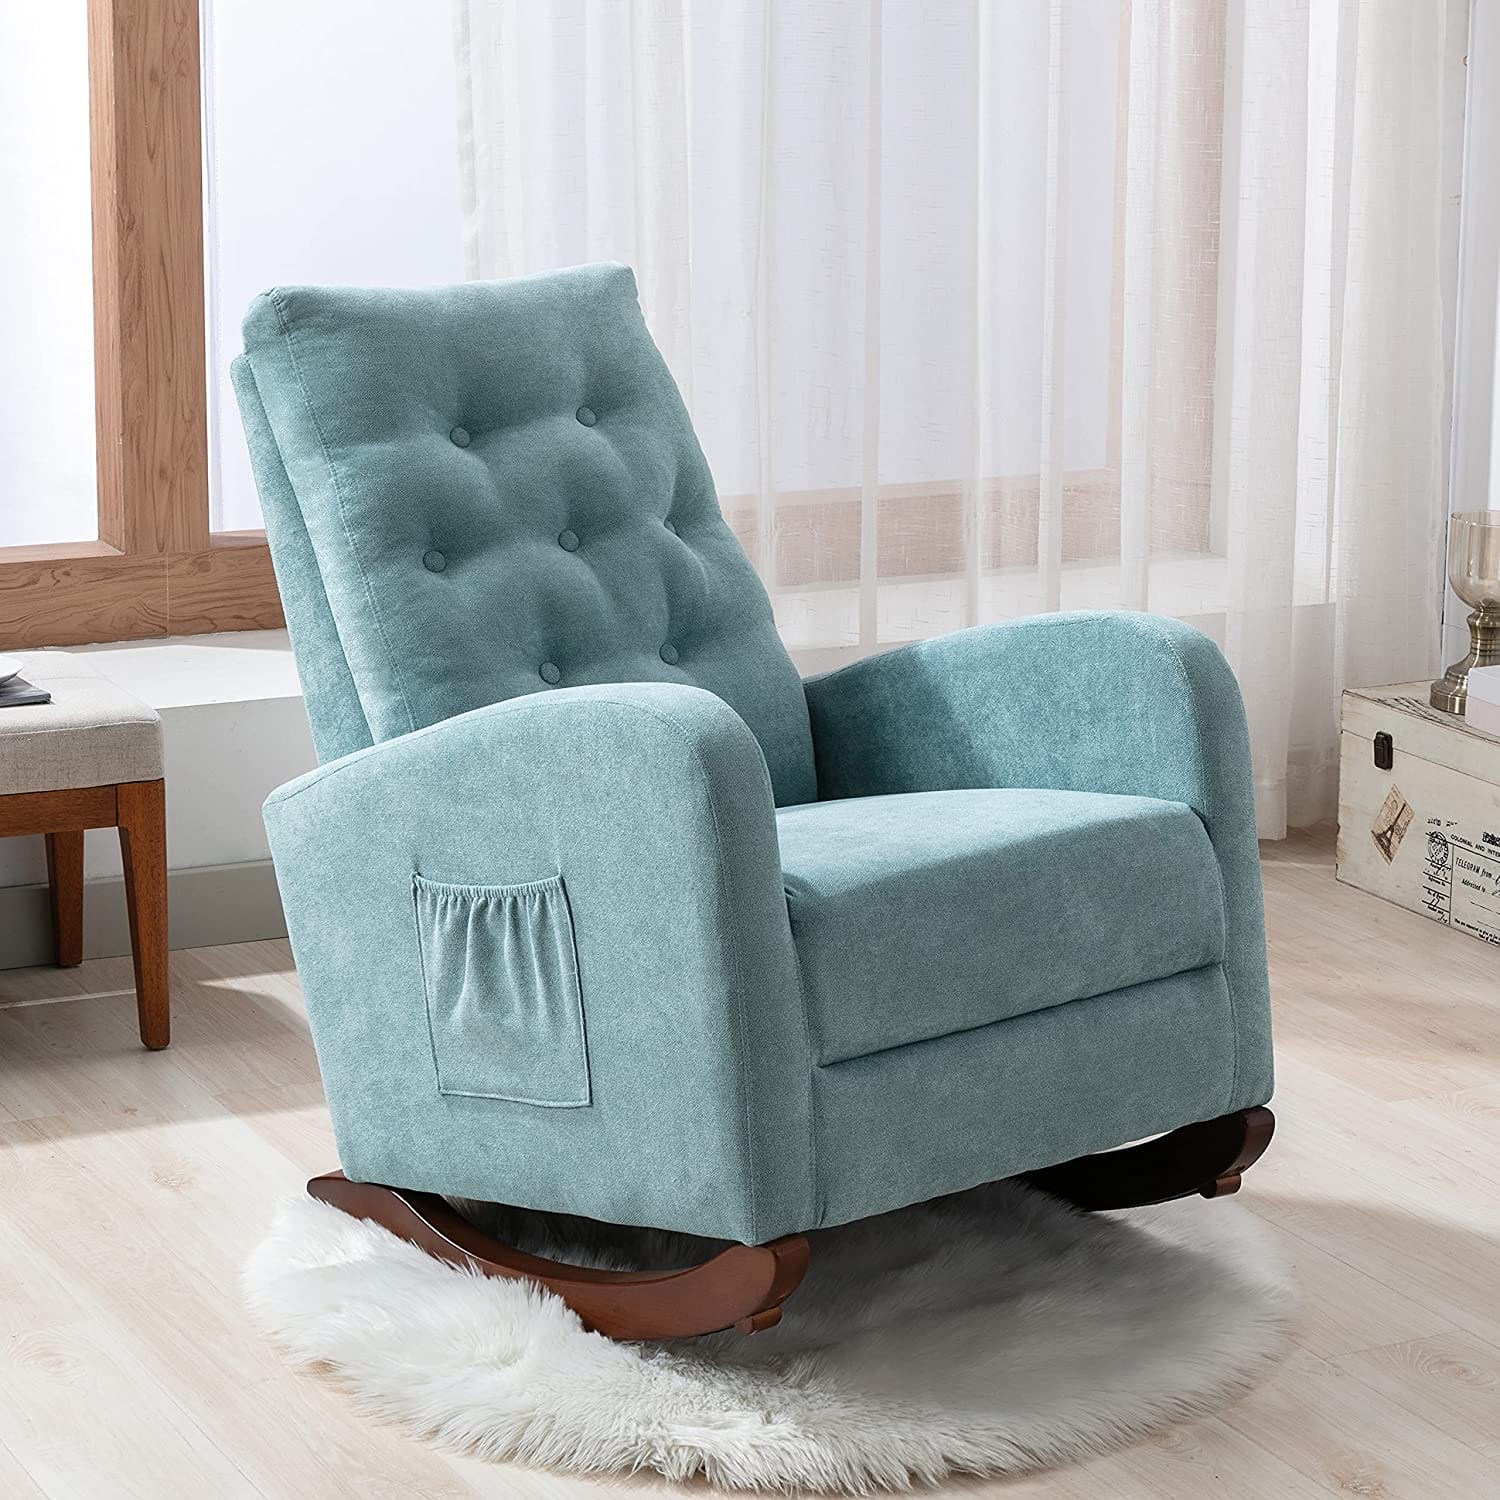 Rocking Chair Mid-Century Modern Nursery Rocking Armchair Upholstered Tall Back Accent Glider Rocker for Living Room